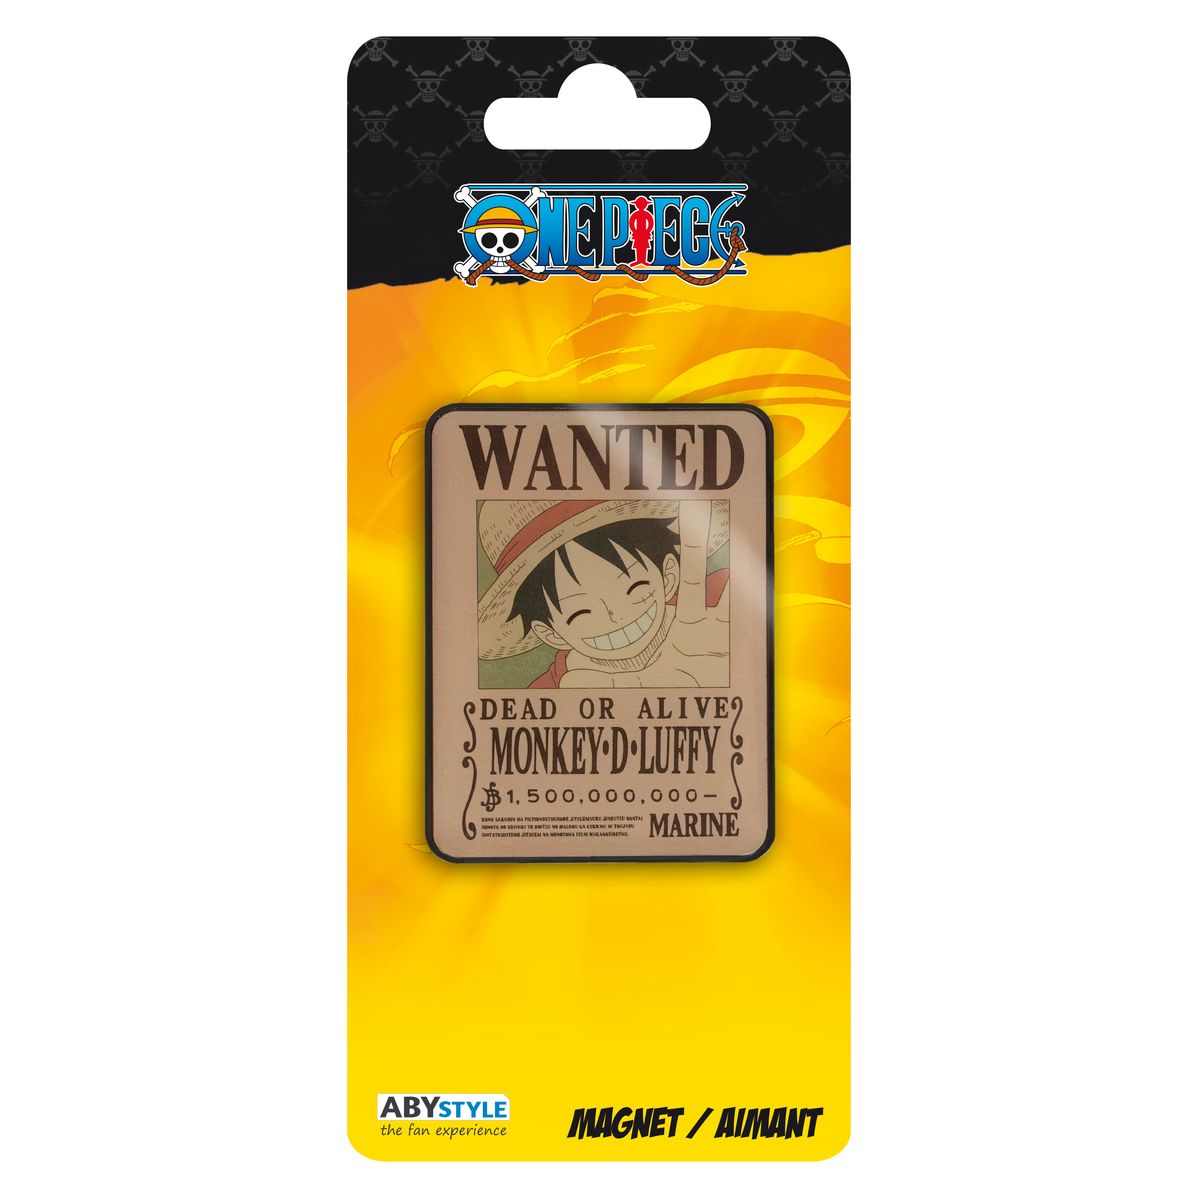 One Piece - Wanted Luffy - Magnet